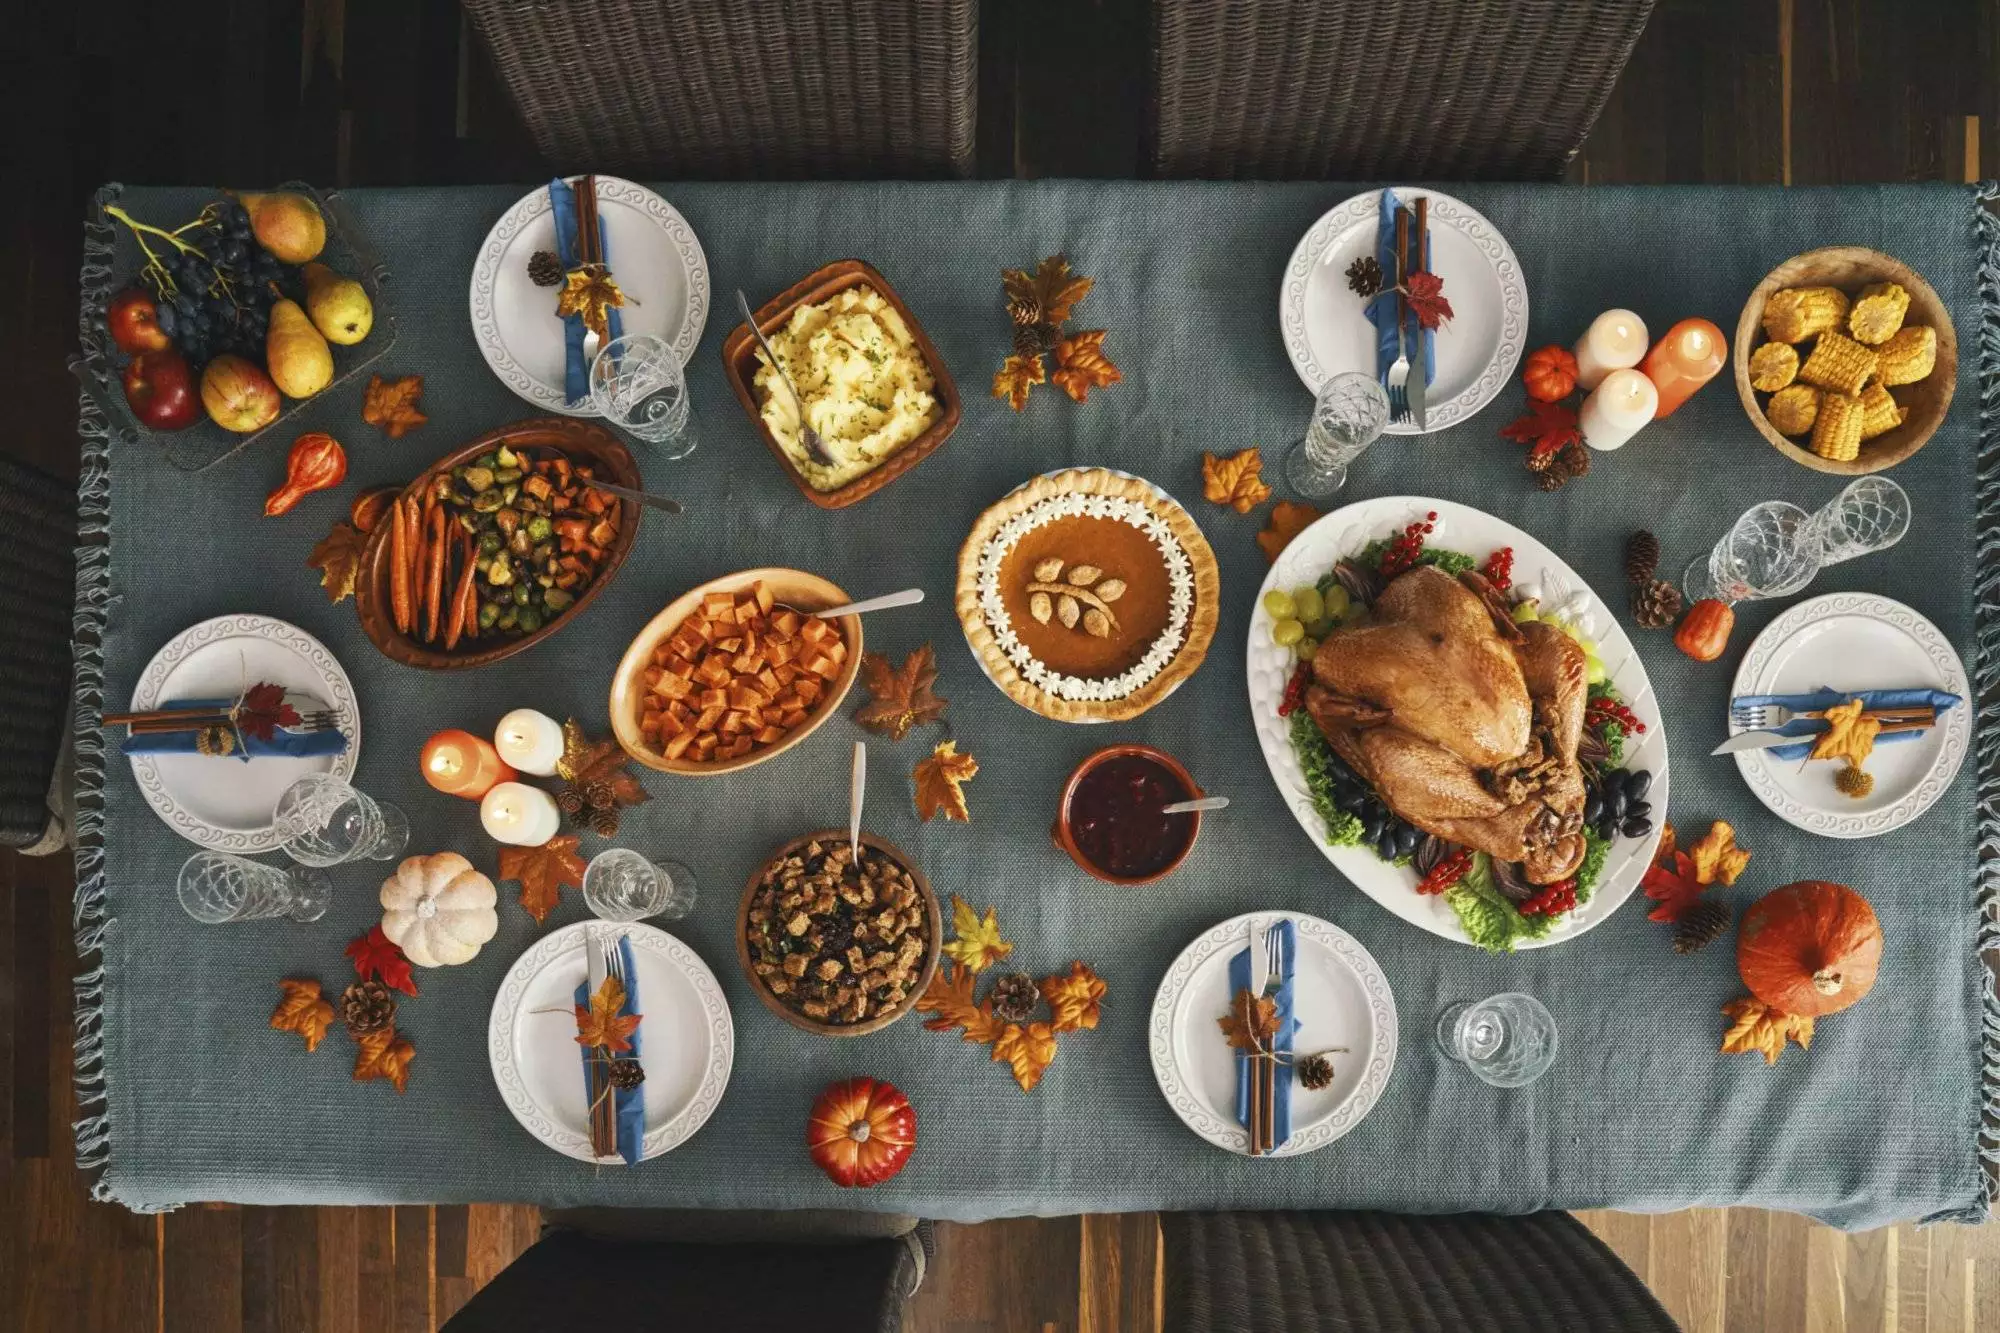 Enjoy Thanksgiving 2021 in Garland with These Family Activities at Northstar Plaza